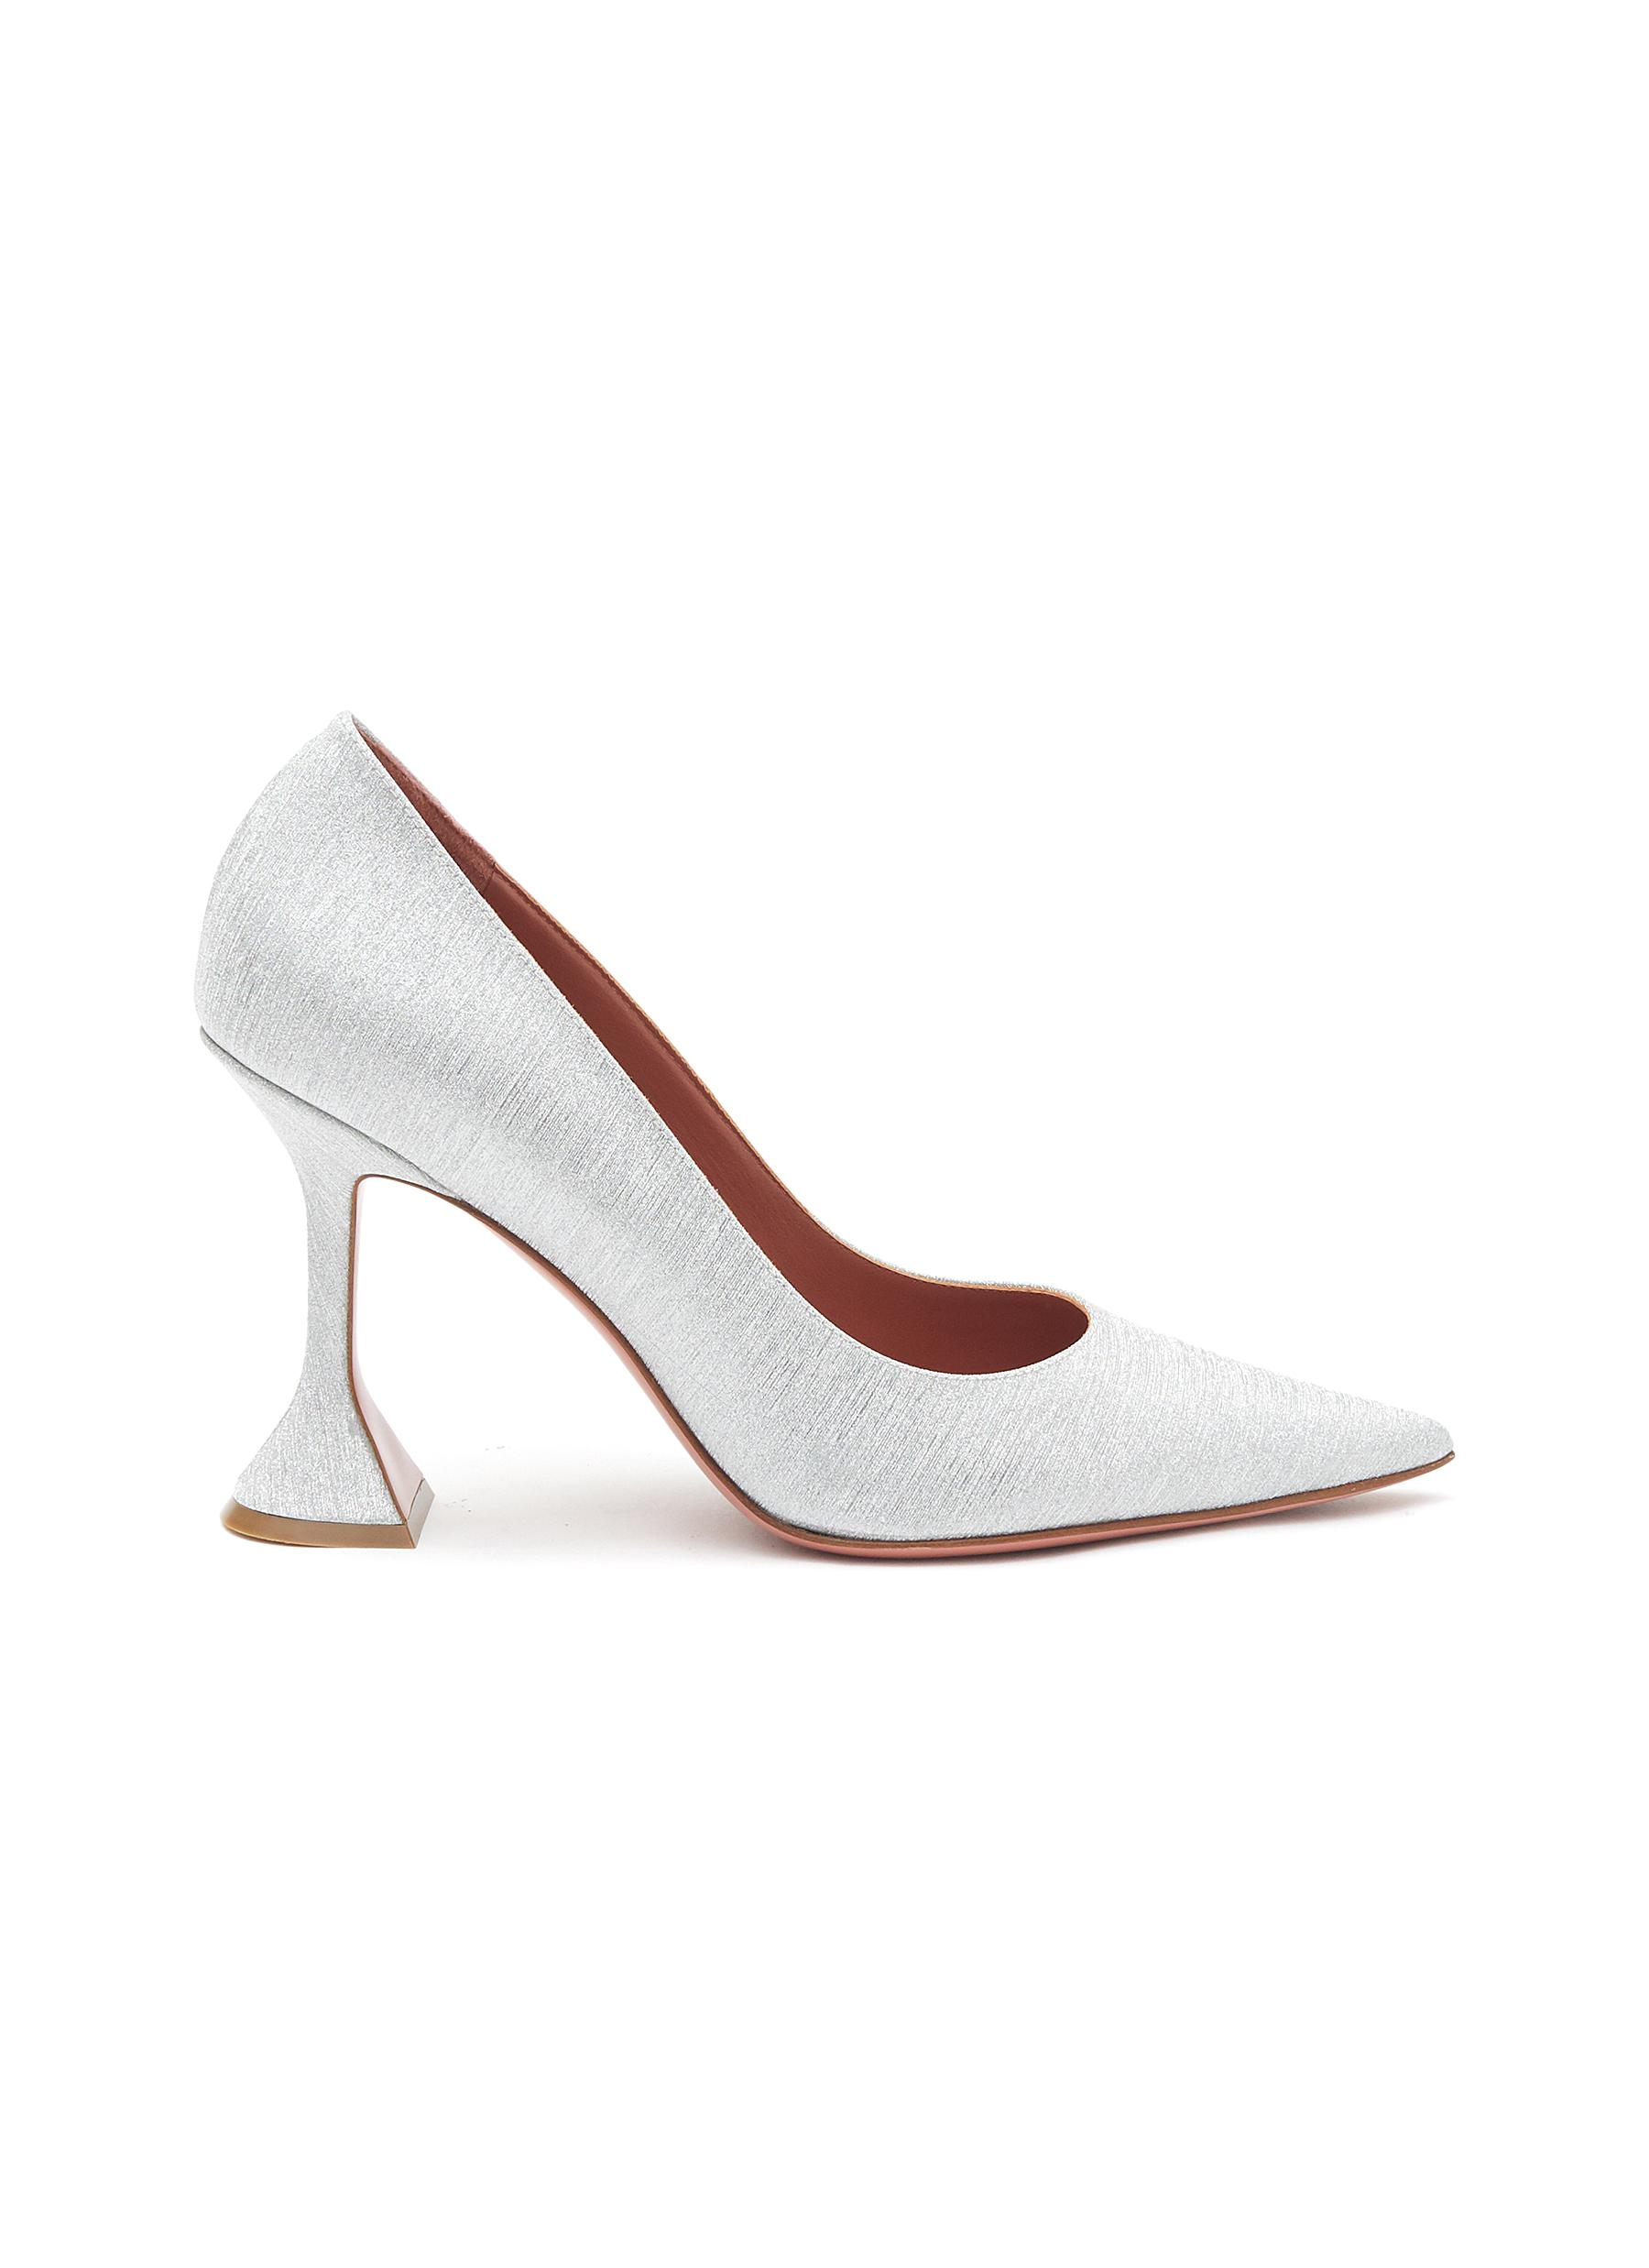 'Ami' 95 Point Toe Brushed Nappa Leather Heels